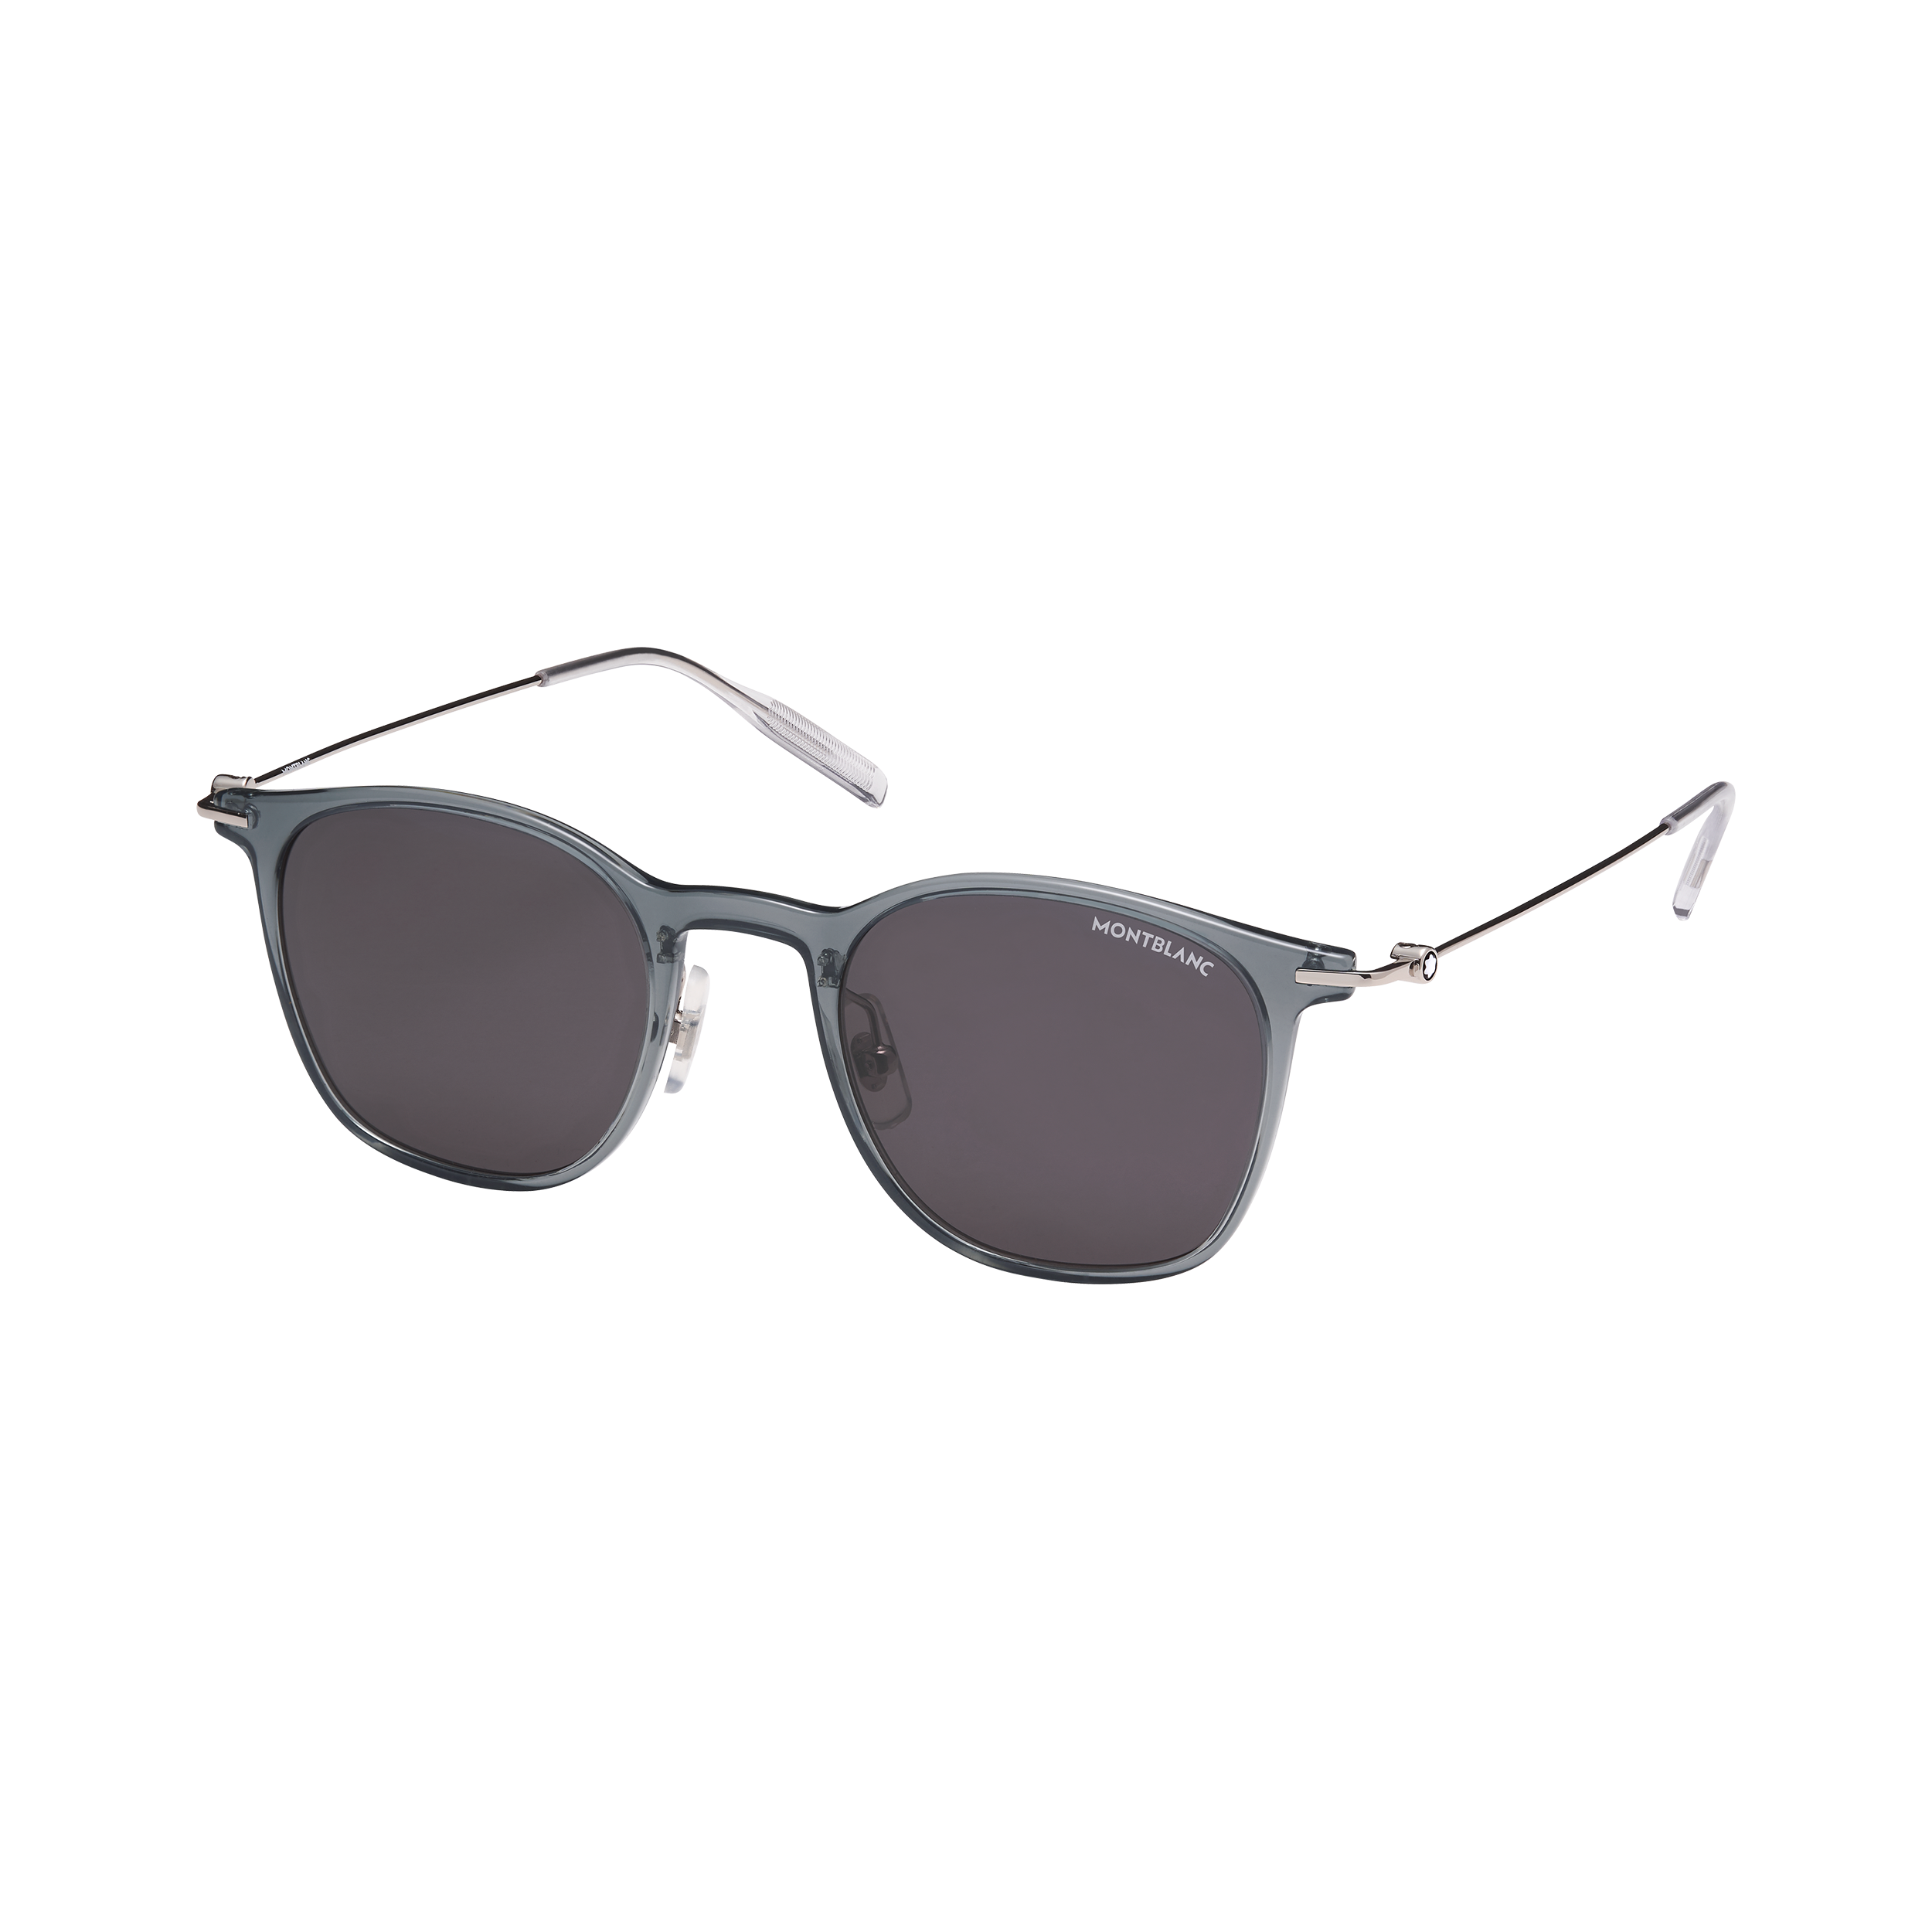 Round Injected Gray Frame Sunglasses, image 1